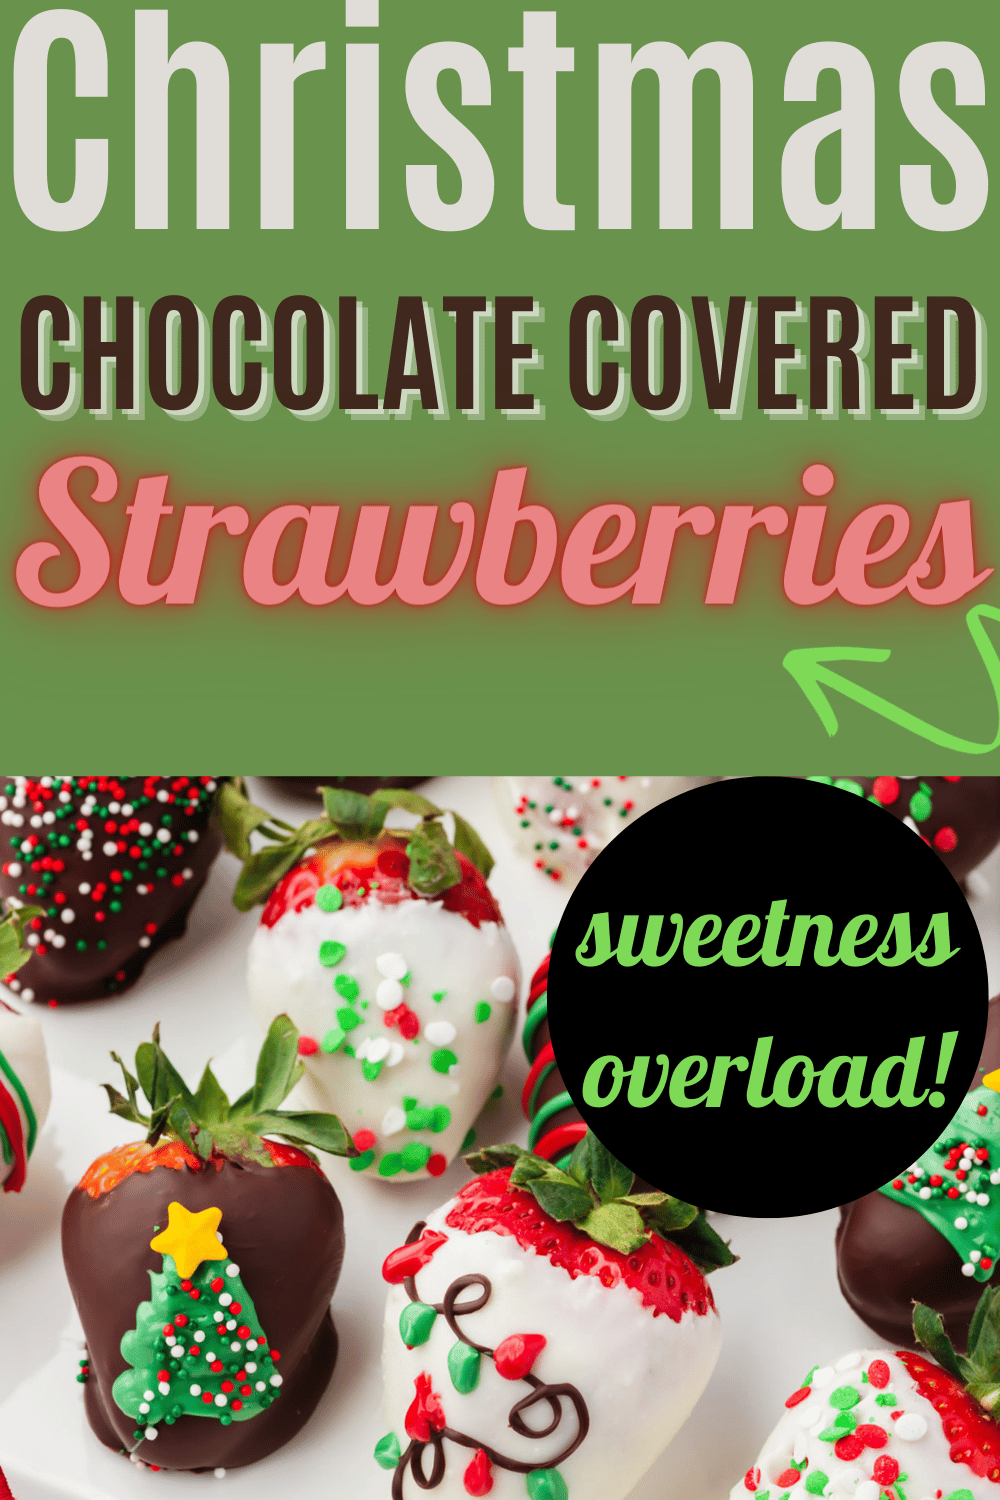 decorated christmas chocolate covered strawberries pin with text overlay christmas chocolate covered strawberries sweetness overload